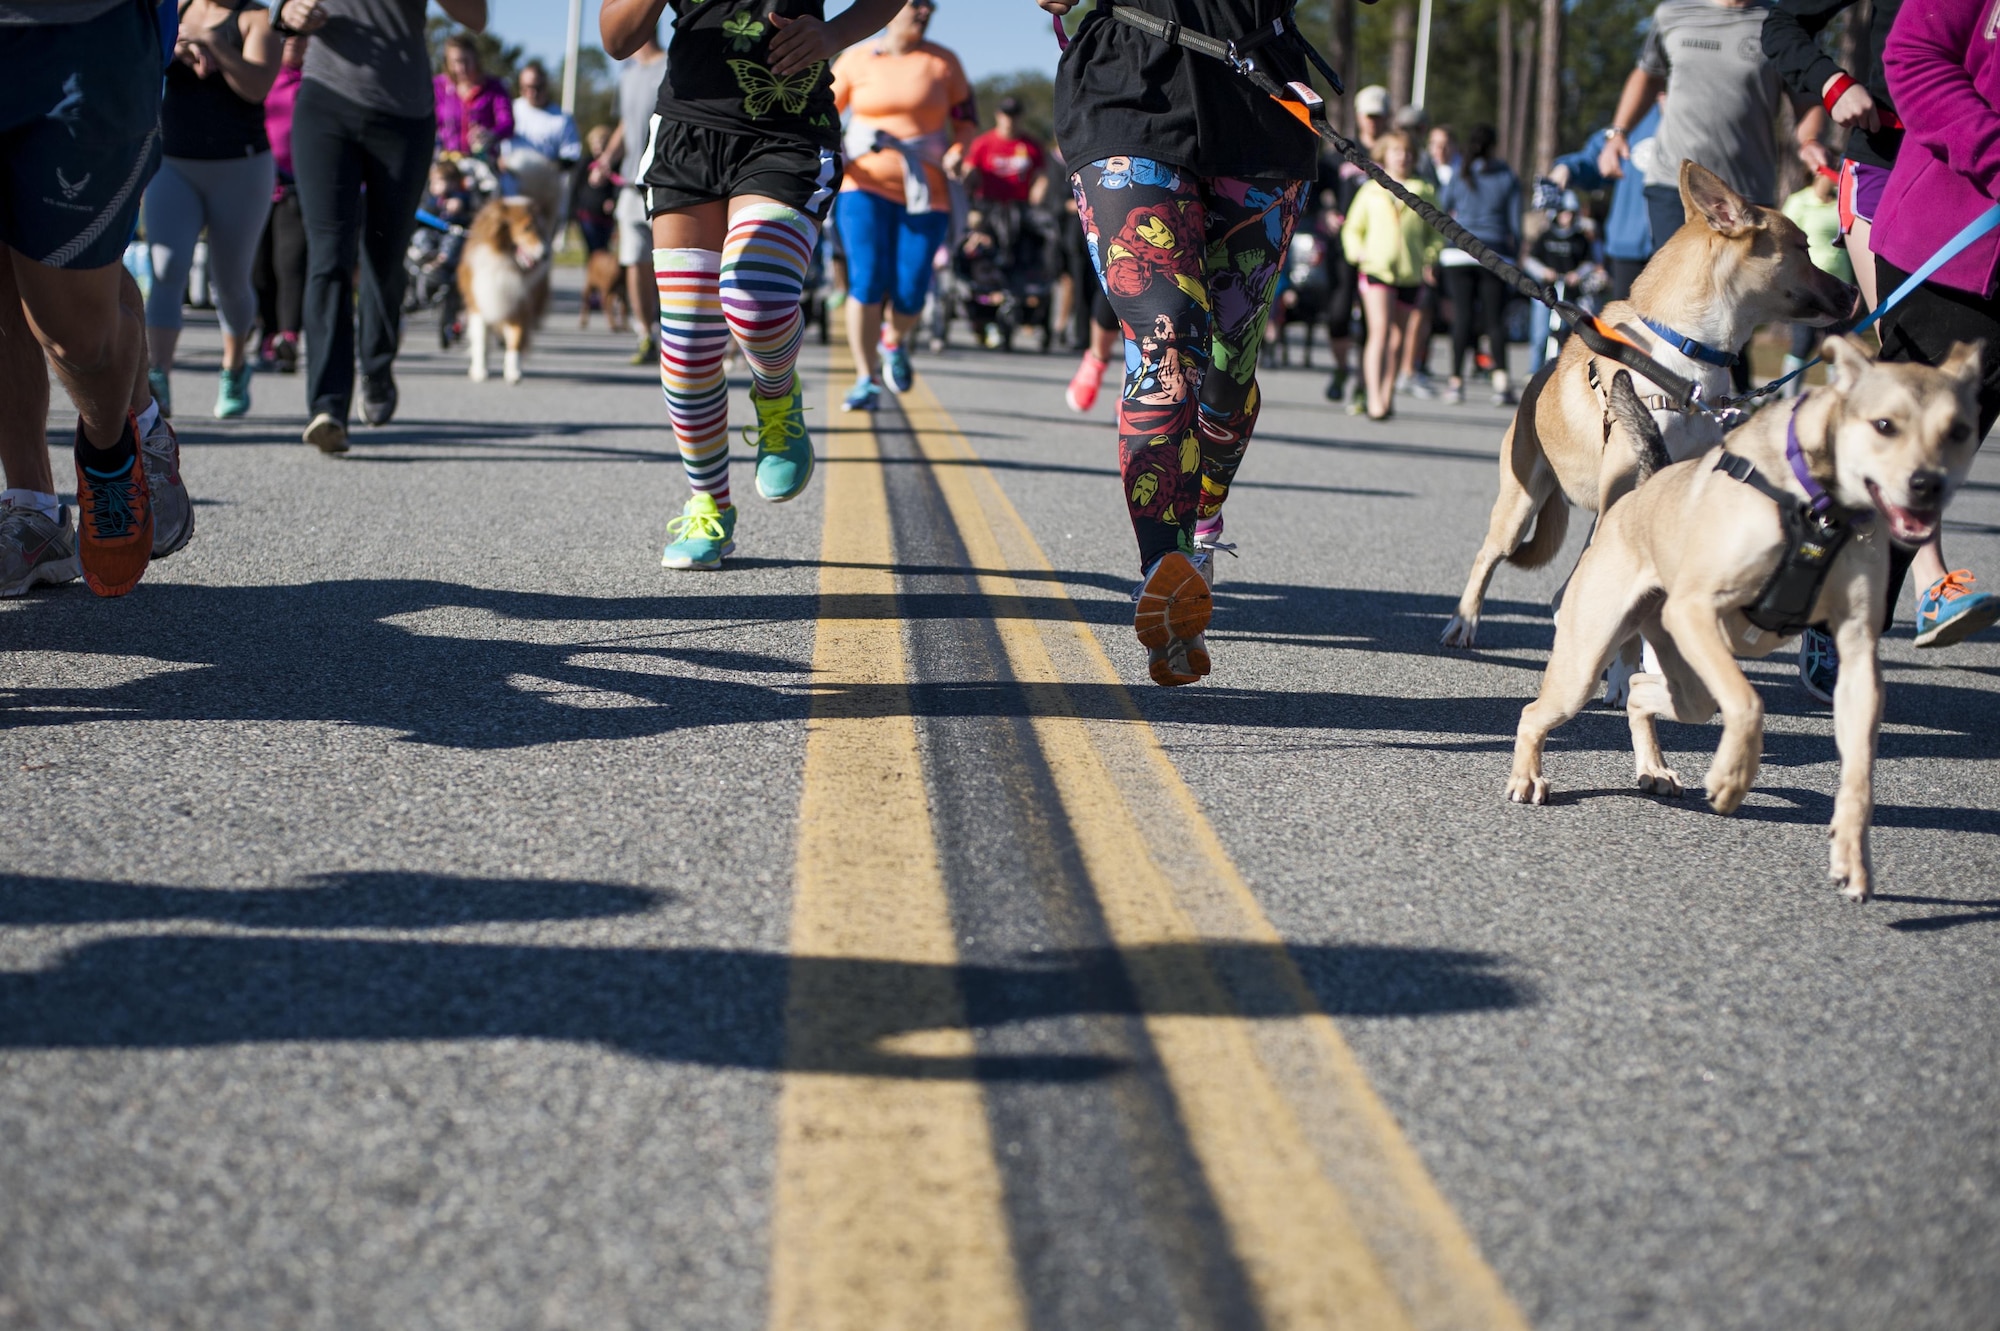 Participants begin the Family & Furry Friends 5k, March 5, 2016, at Moody Air Force Base, Ga. To encourage health and wellness,  various fruits were available for attendees, as well as dog treats for the furry friends. (U.S. Air Force photo by Airman 1st Class Lauren M. Johnson)